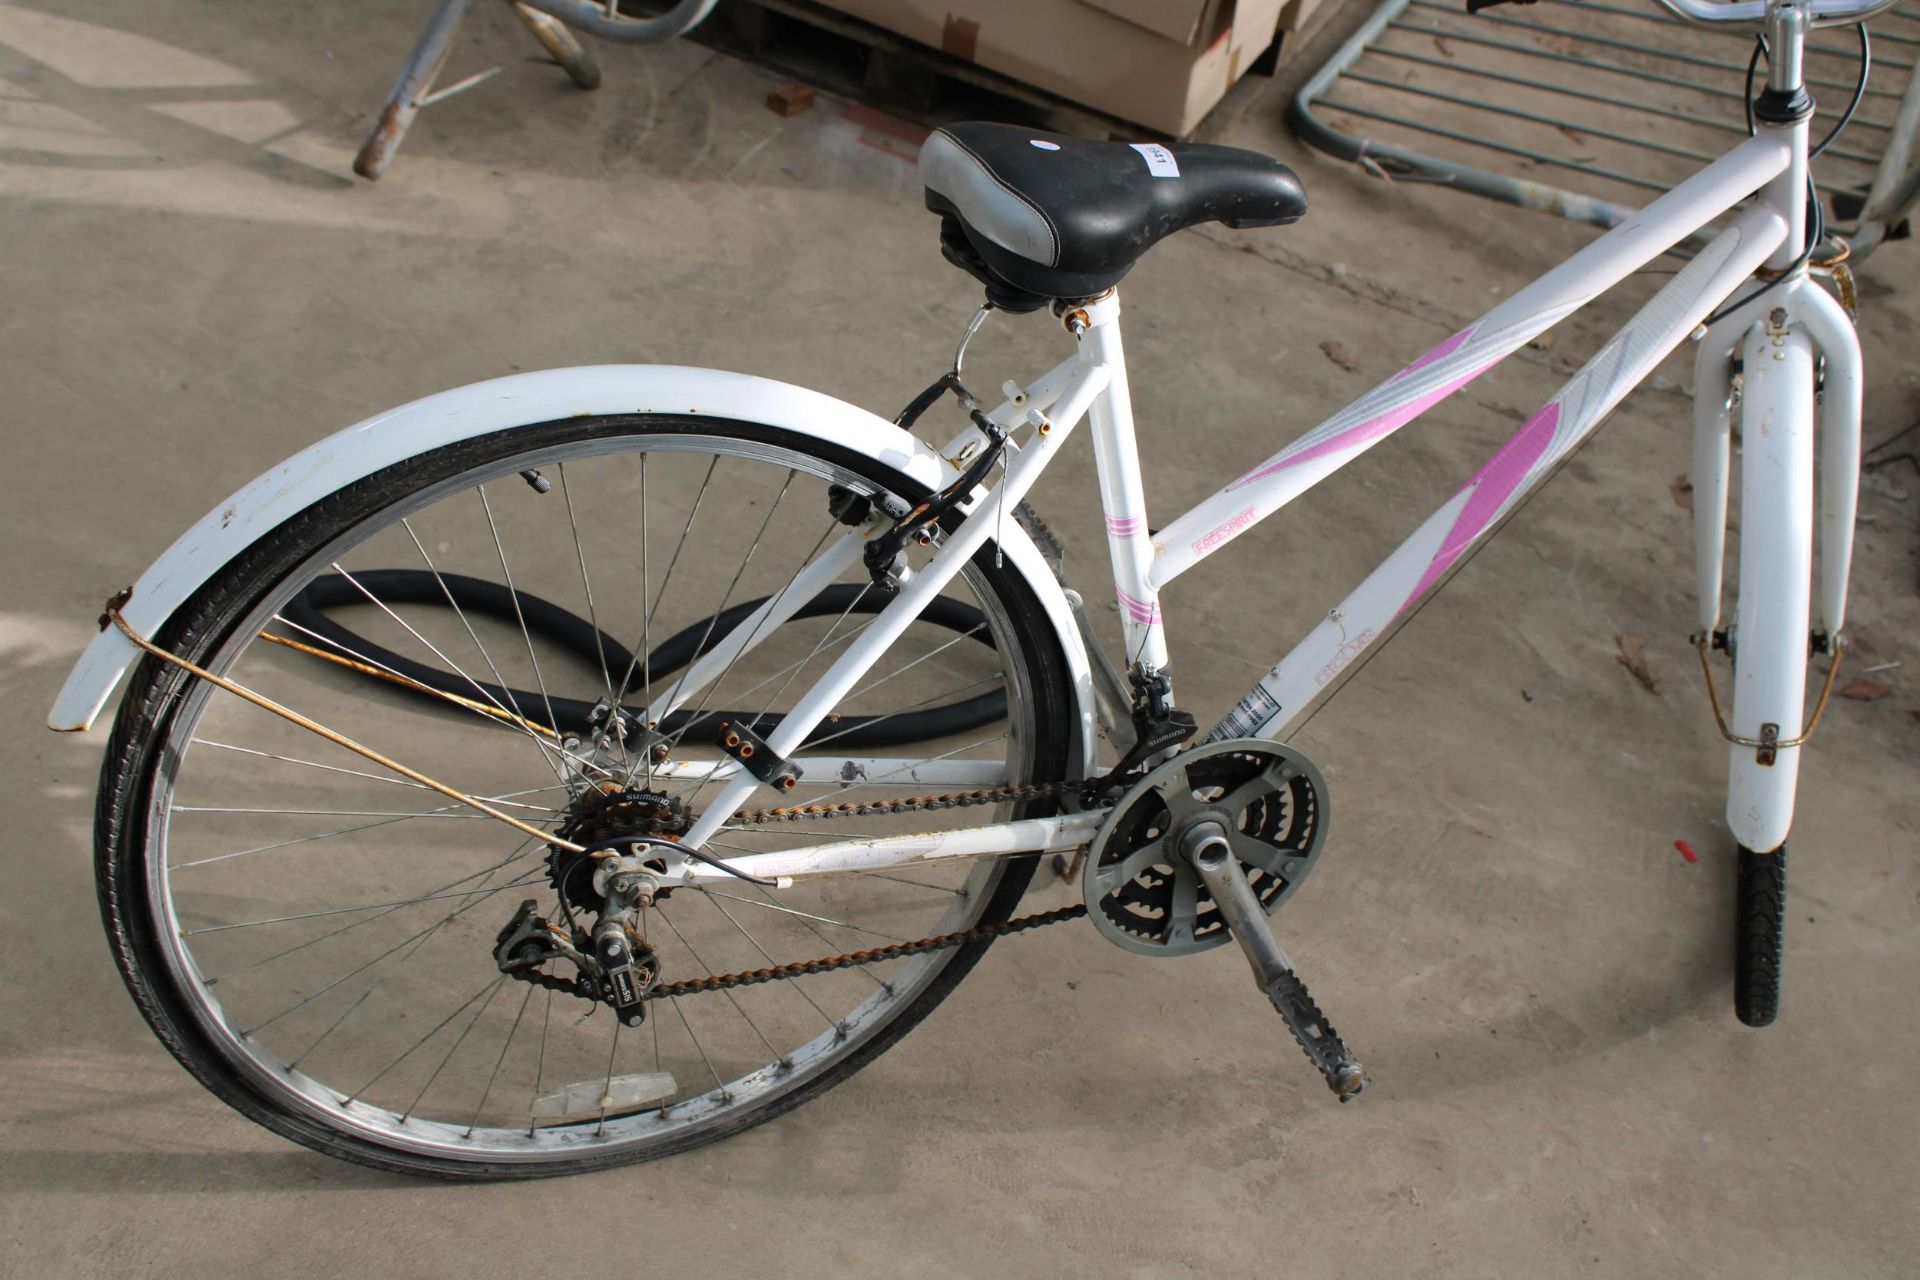 A DISCOVER FREESPIRIT LADIES BIKE WITH 18 SPEED SHIMANO GEAR SYSTEM - Image 3 of 4